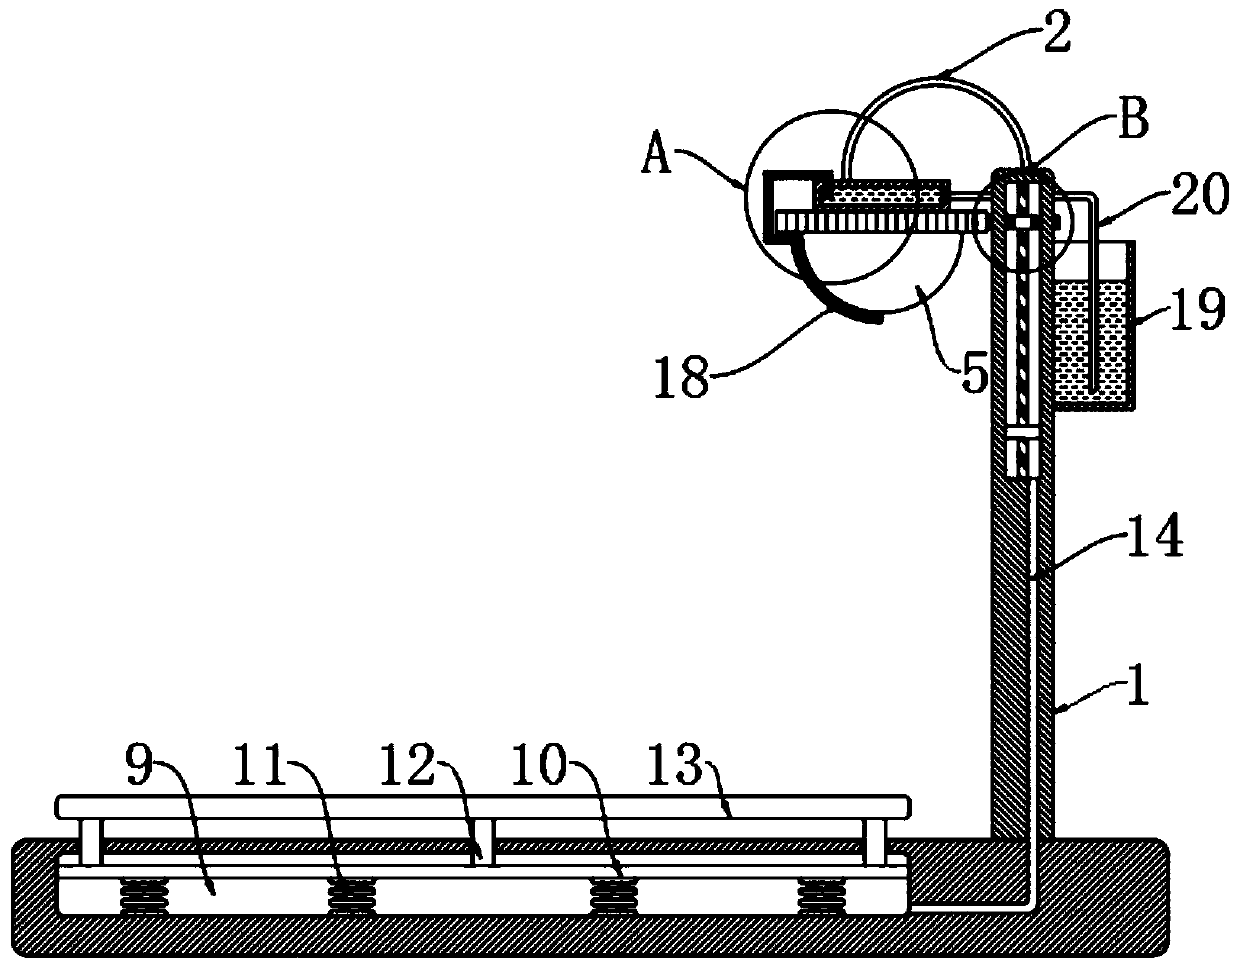 Self-cleaning device for LED street lamp